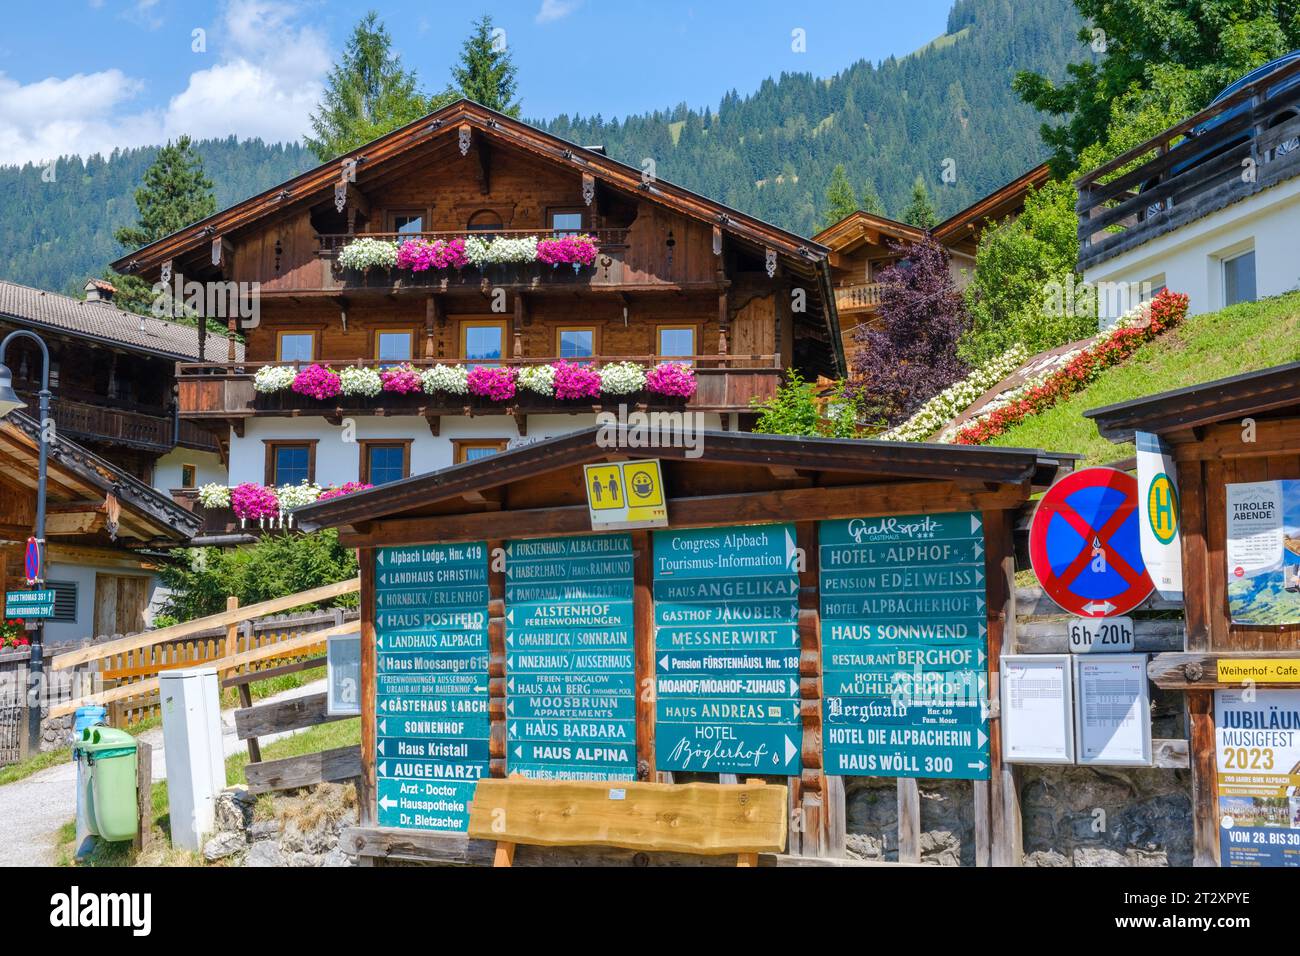 Alpbach Village centre with signs for hotels & guest houses. Traditional Alpine architecture, flowers on balconies. Tyrol, Austria. Stock Photo